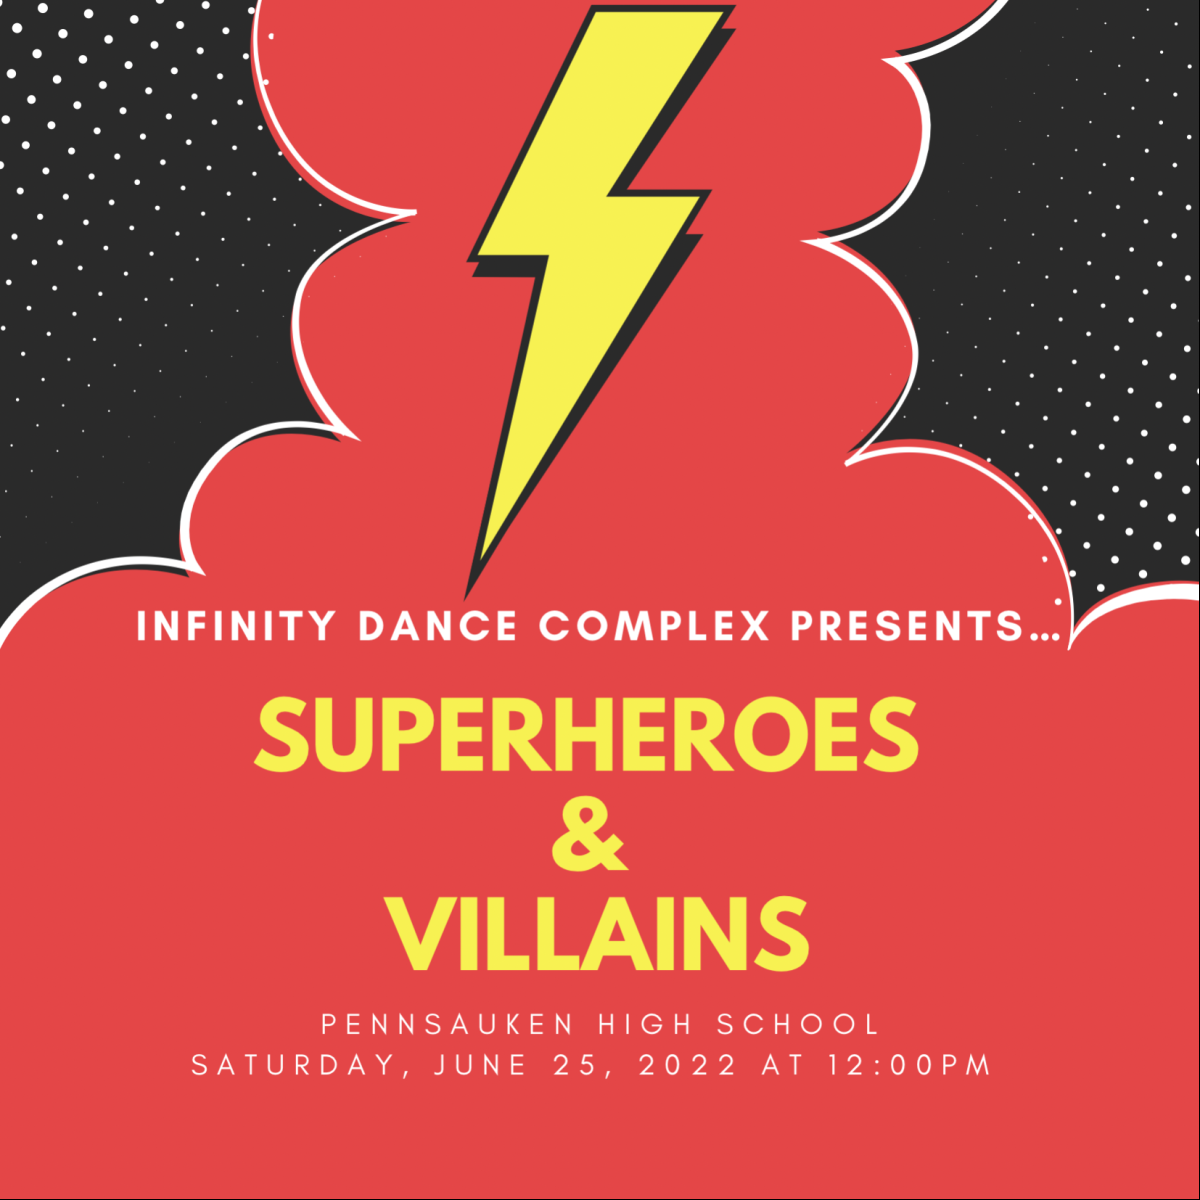 Image for Infinity Dance Complex Presents Superheroes And Villains